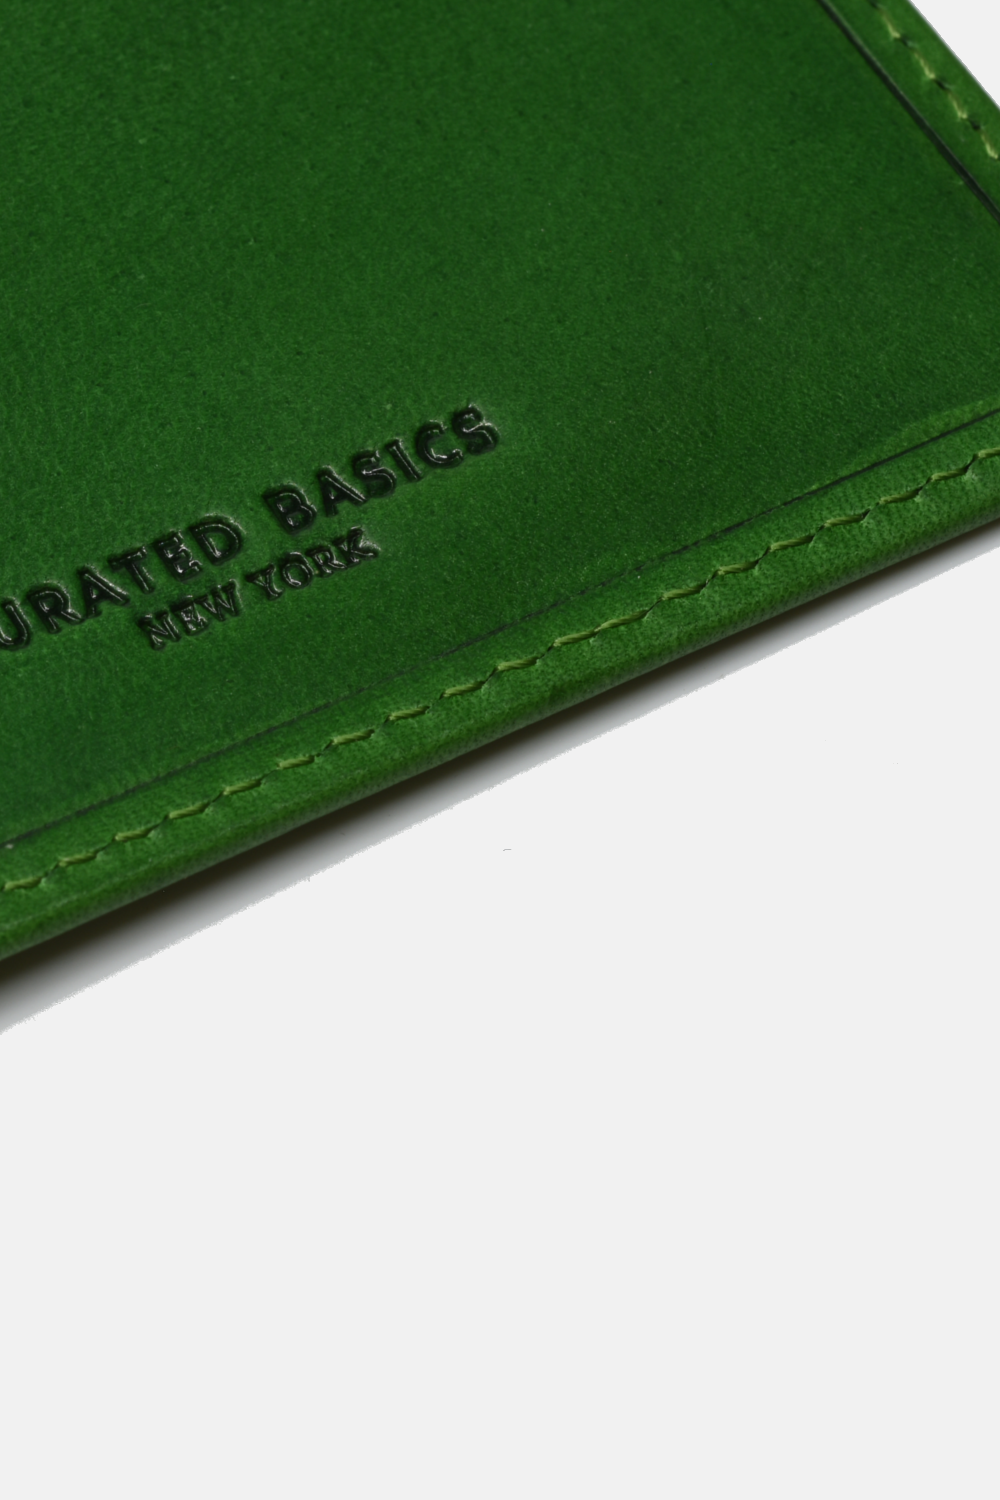 close-up of green wallet with "curated basics new york" logo